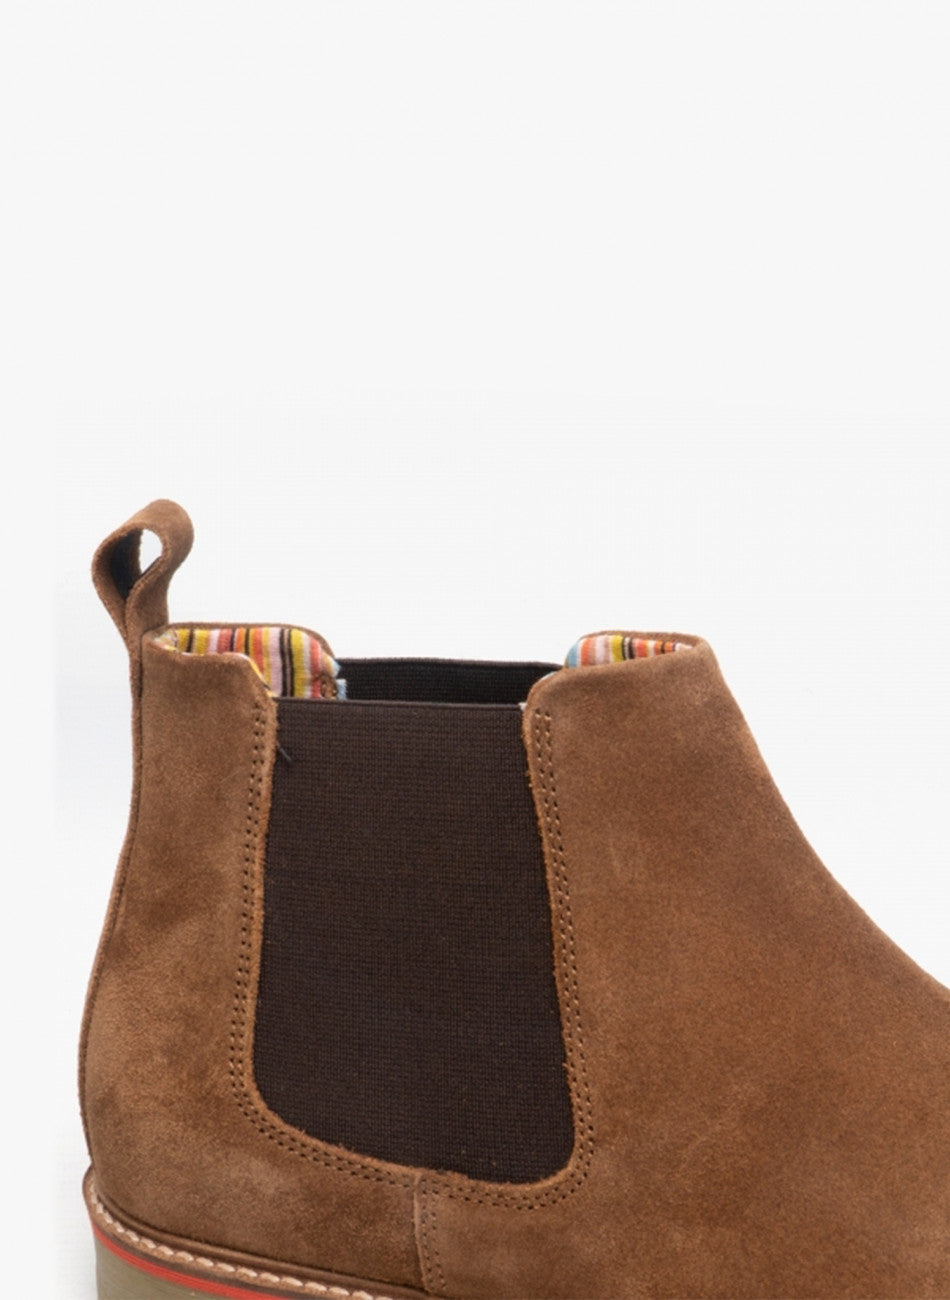 Chelsea Boot - Tan Suede